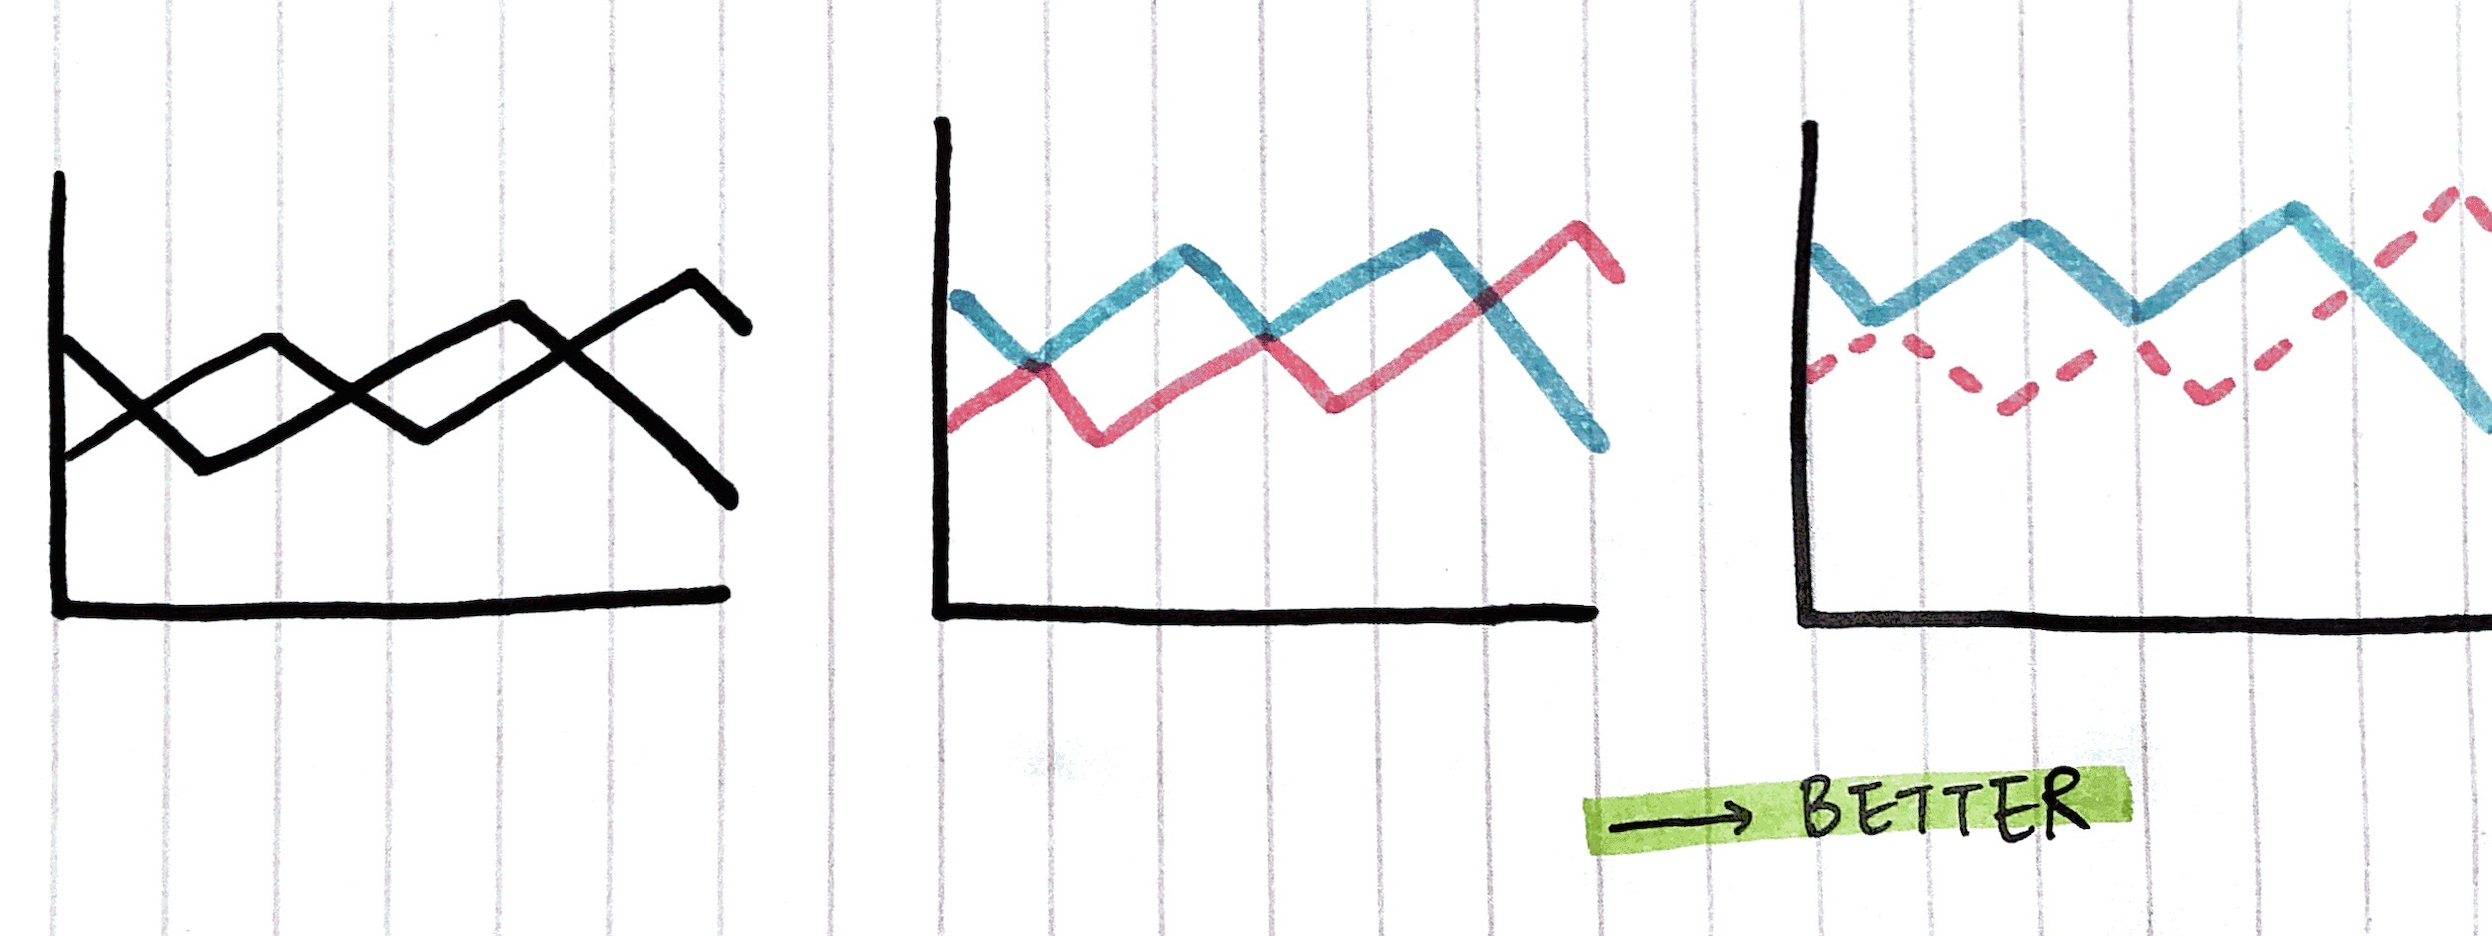 Using multiple visual encodings to distinguish the lines in a line chart helps reduce misinterpretations